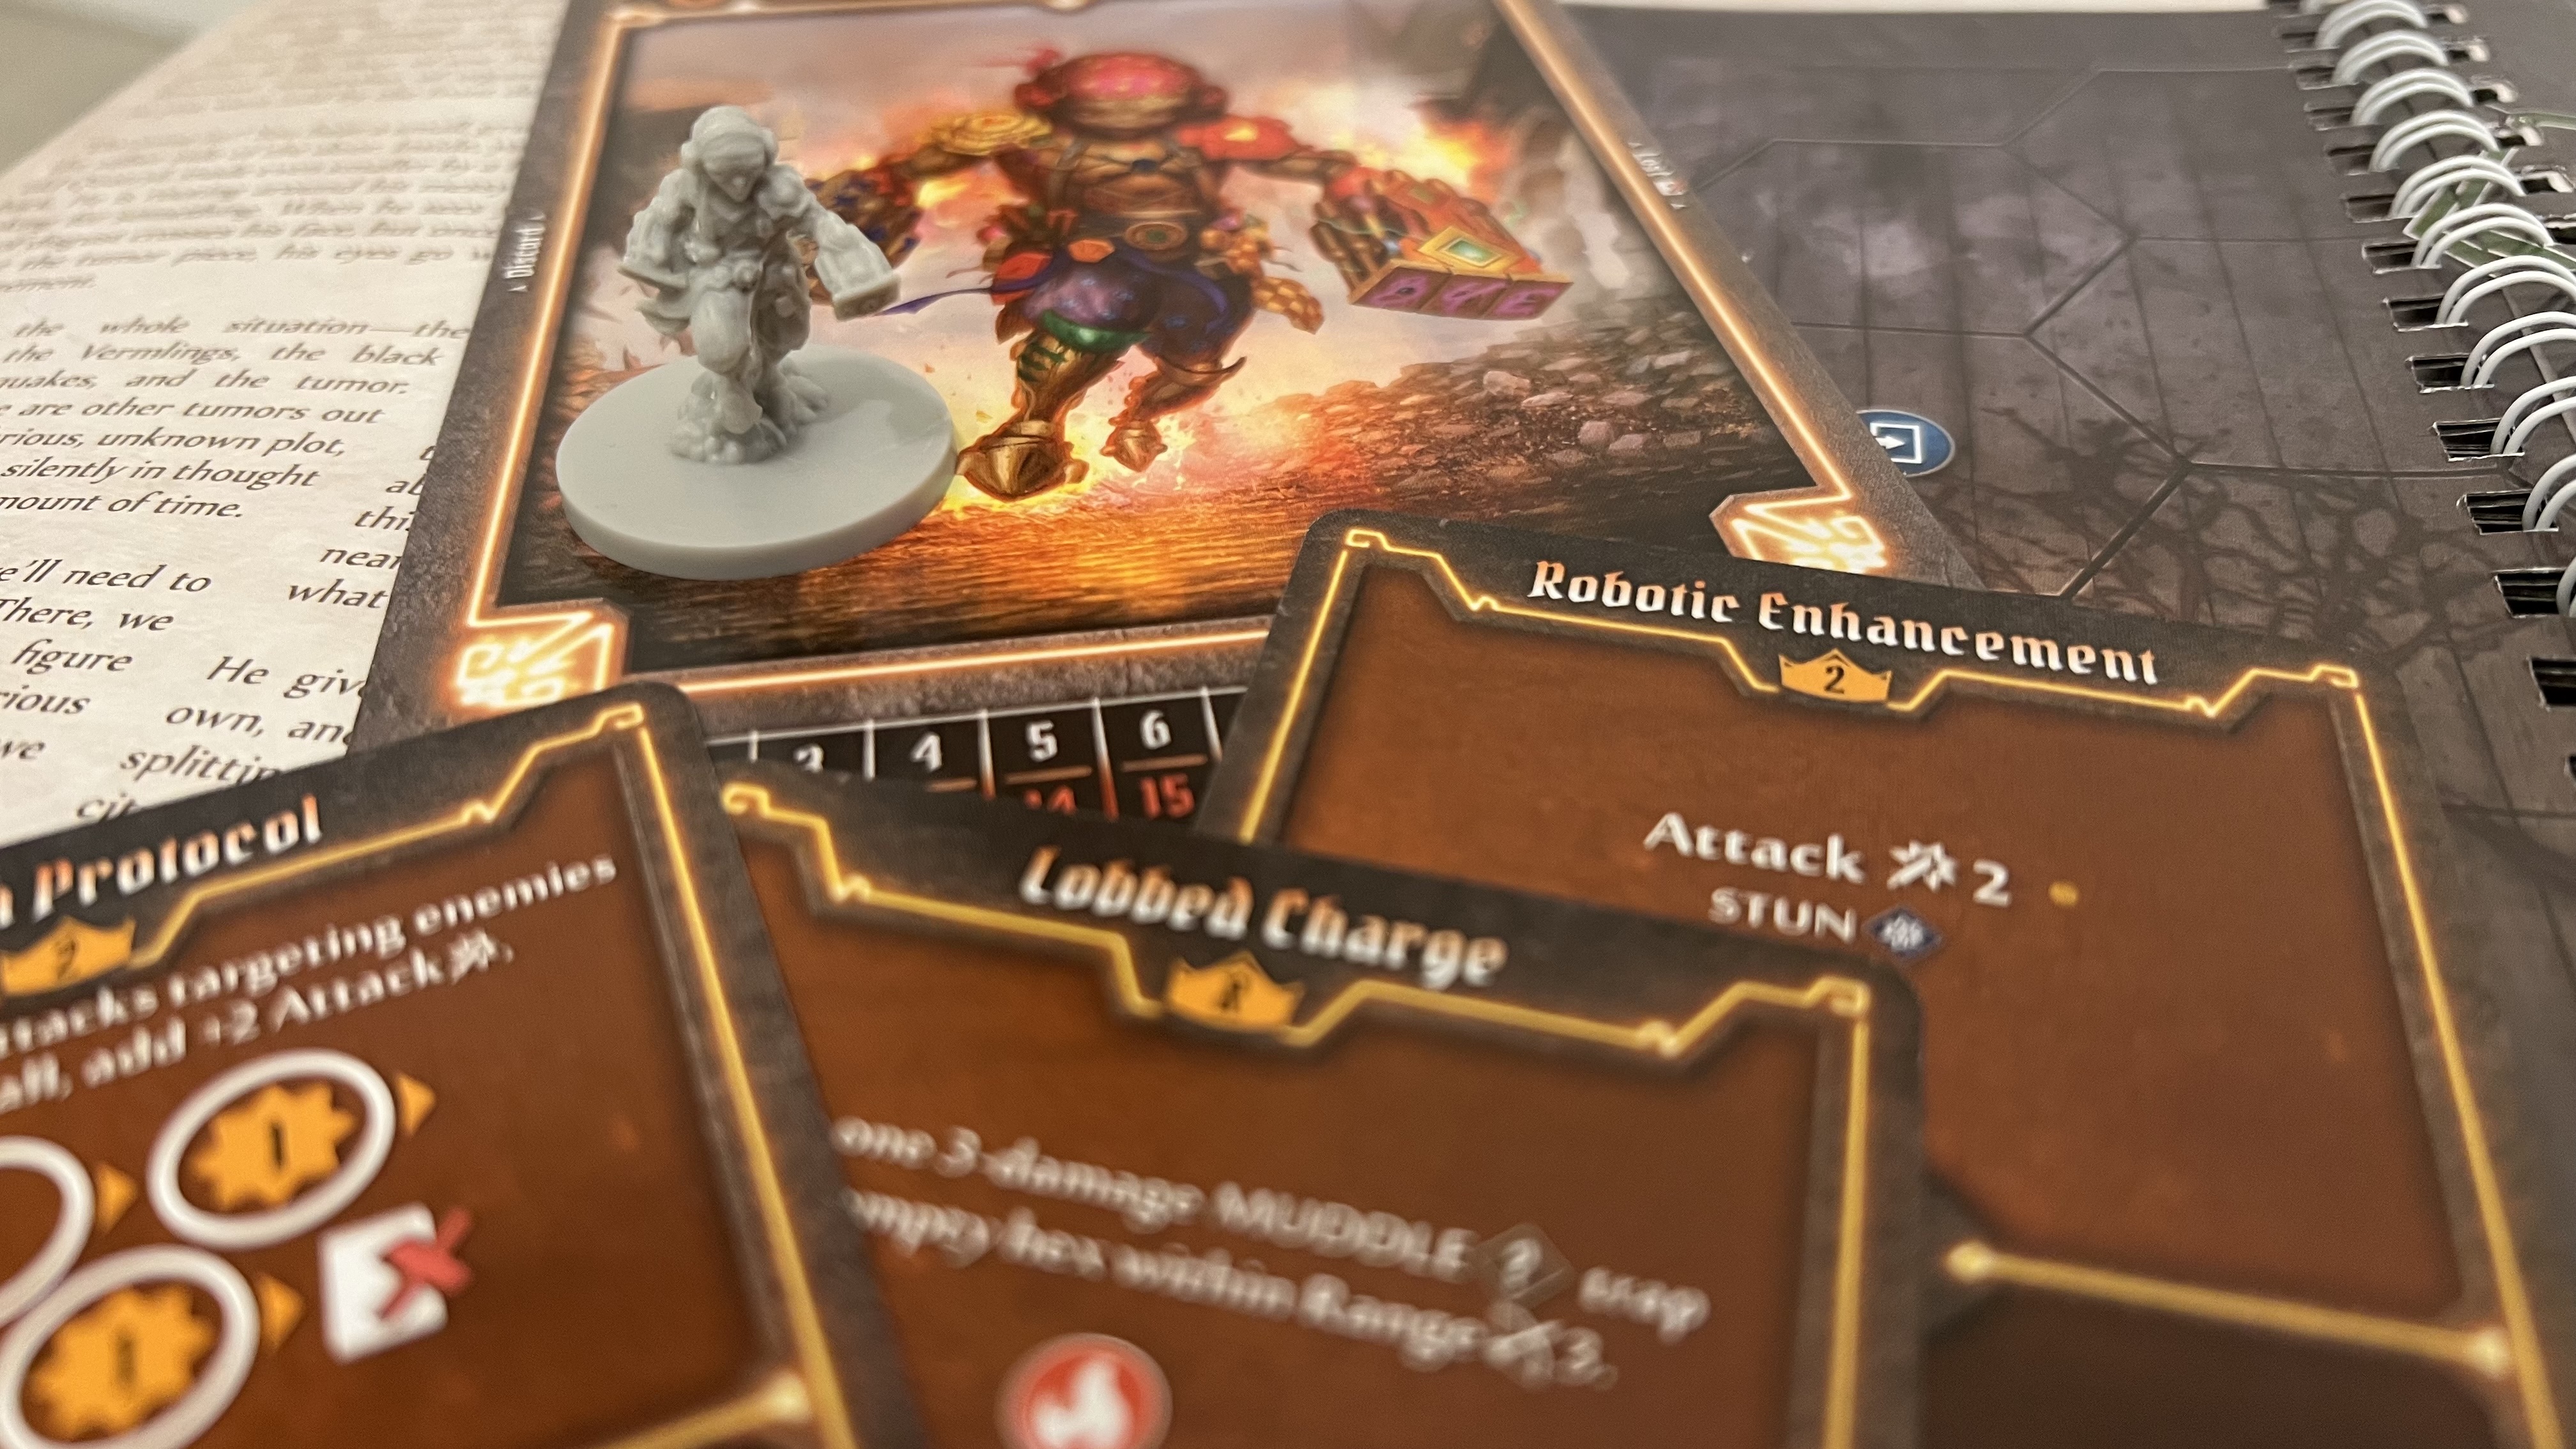 Gloomhaven Jaws of the Lion ability cards, character card and and mini